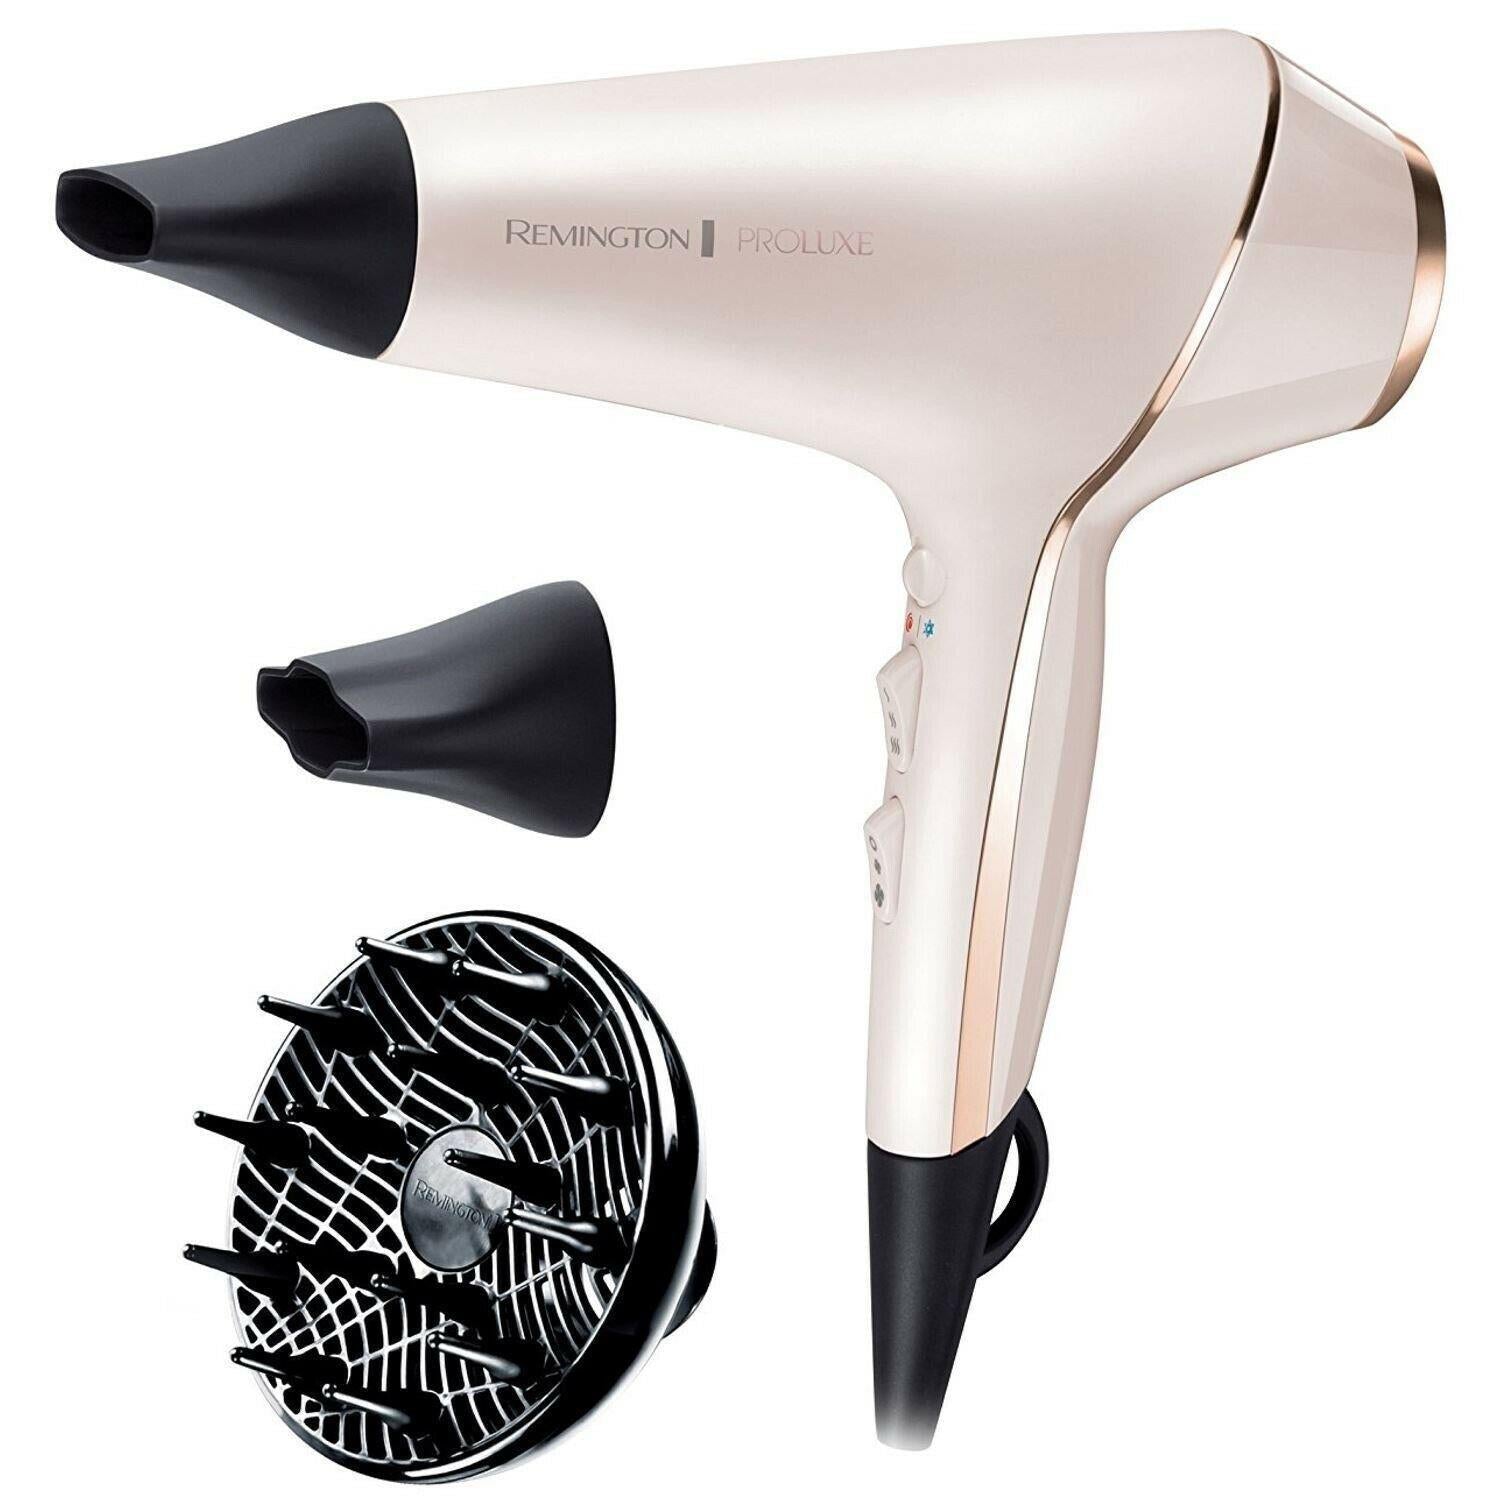 Remington ProLuxe Hair Dryer AC 2400W with Diffuser Rose Gold - AC9140